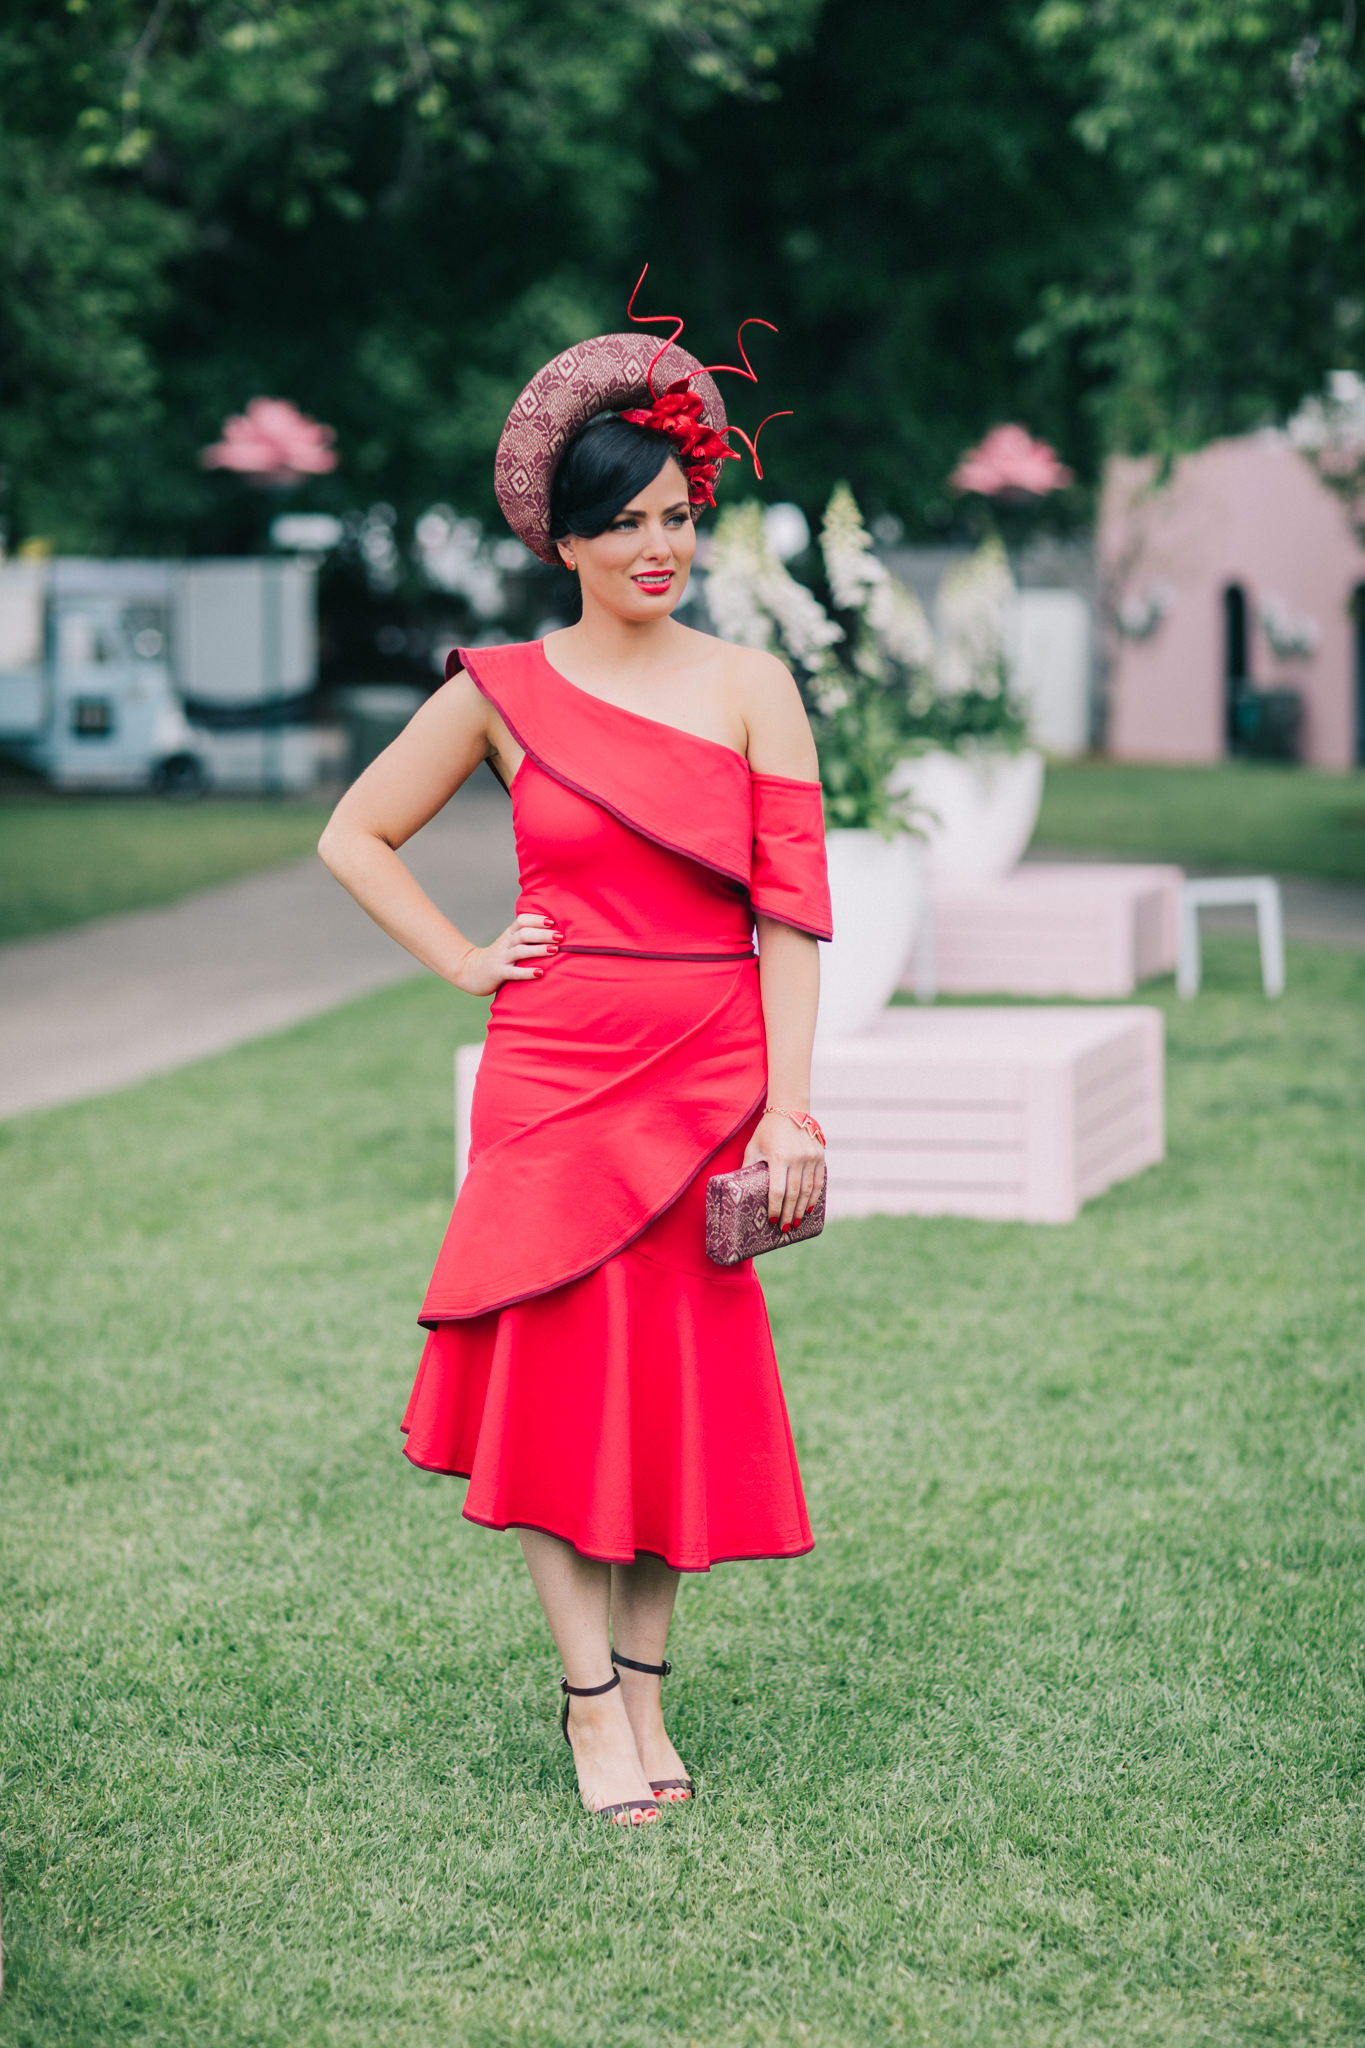 Fashion photography at the melbourne races - the best outfit trends